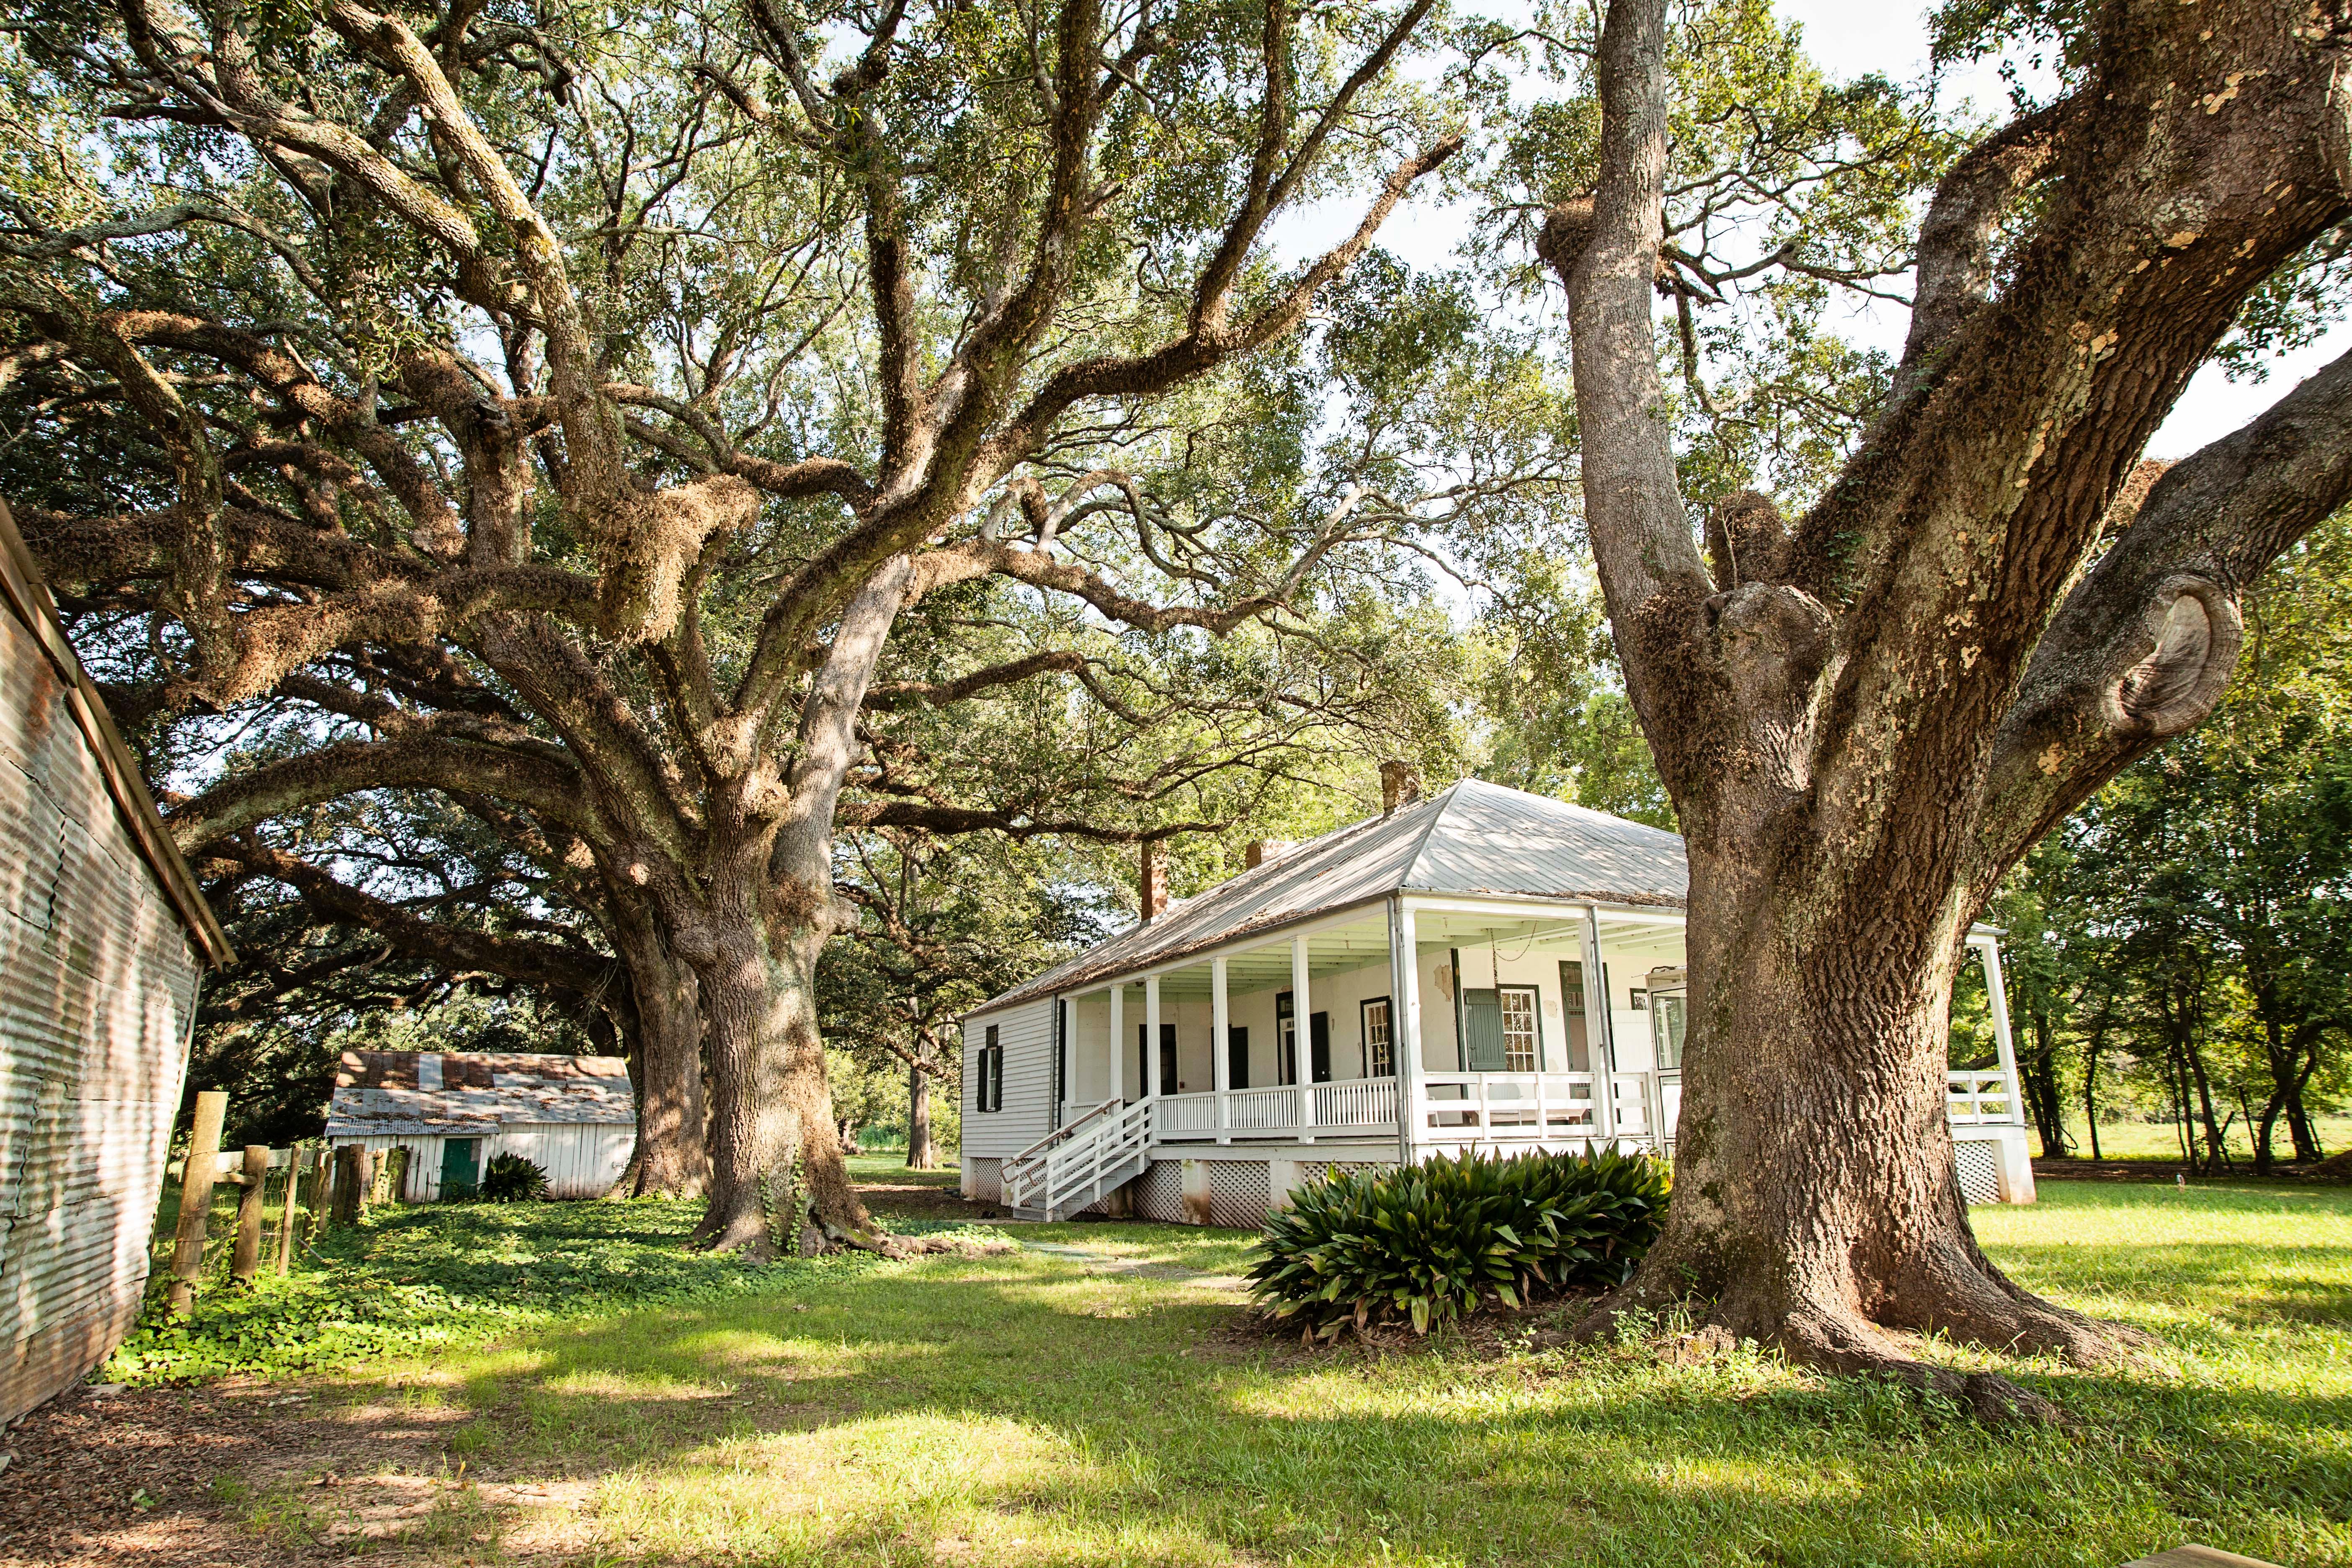 A raised Creole cottage surrounded by oak trees.